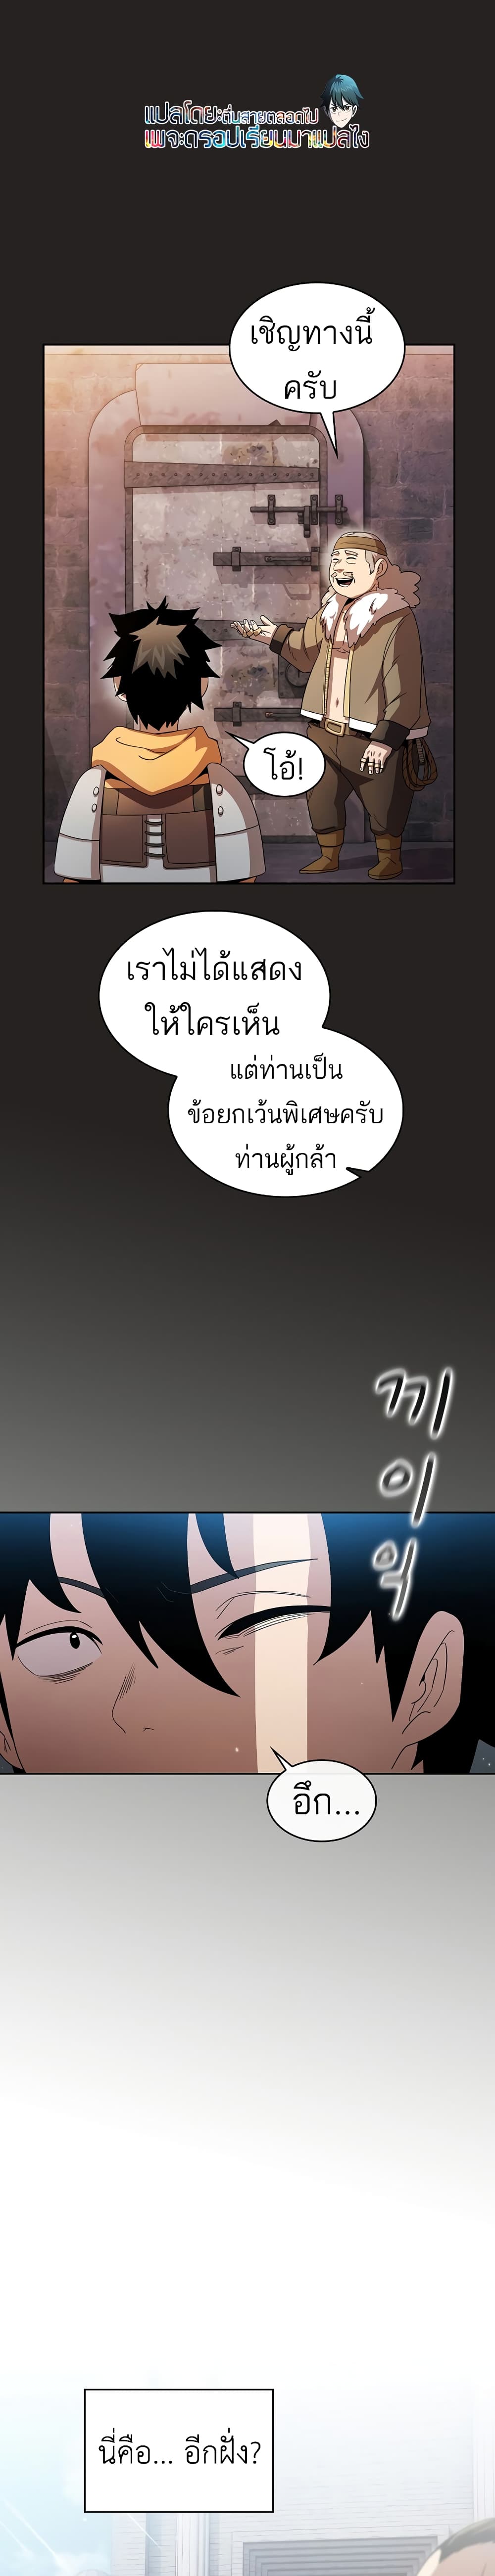 Is This Hero for Real à¸à¸­à¸à¸à¸µà¹ 31 (6)